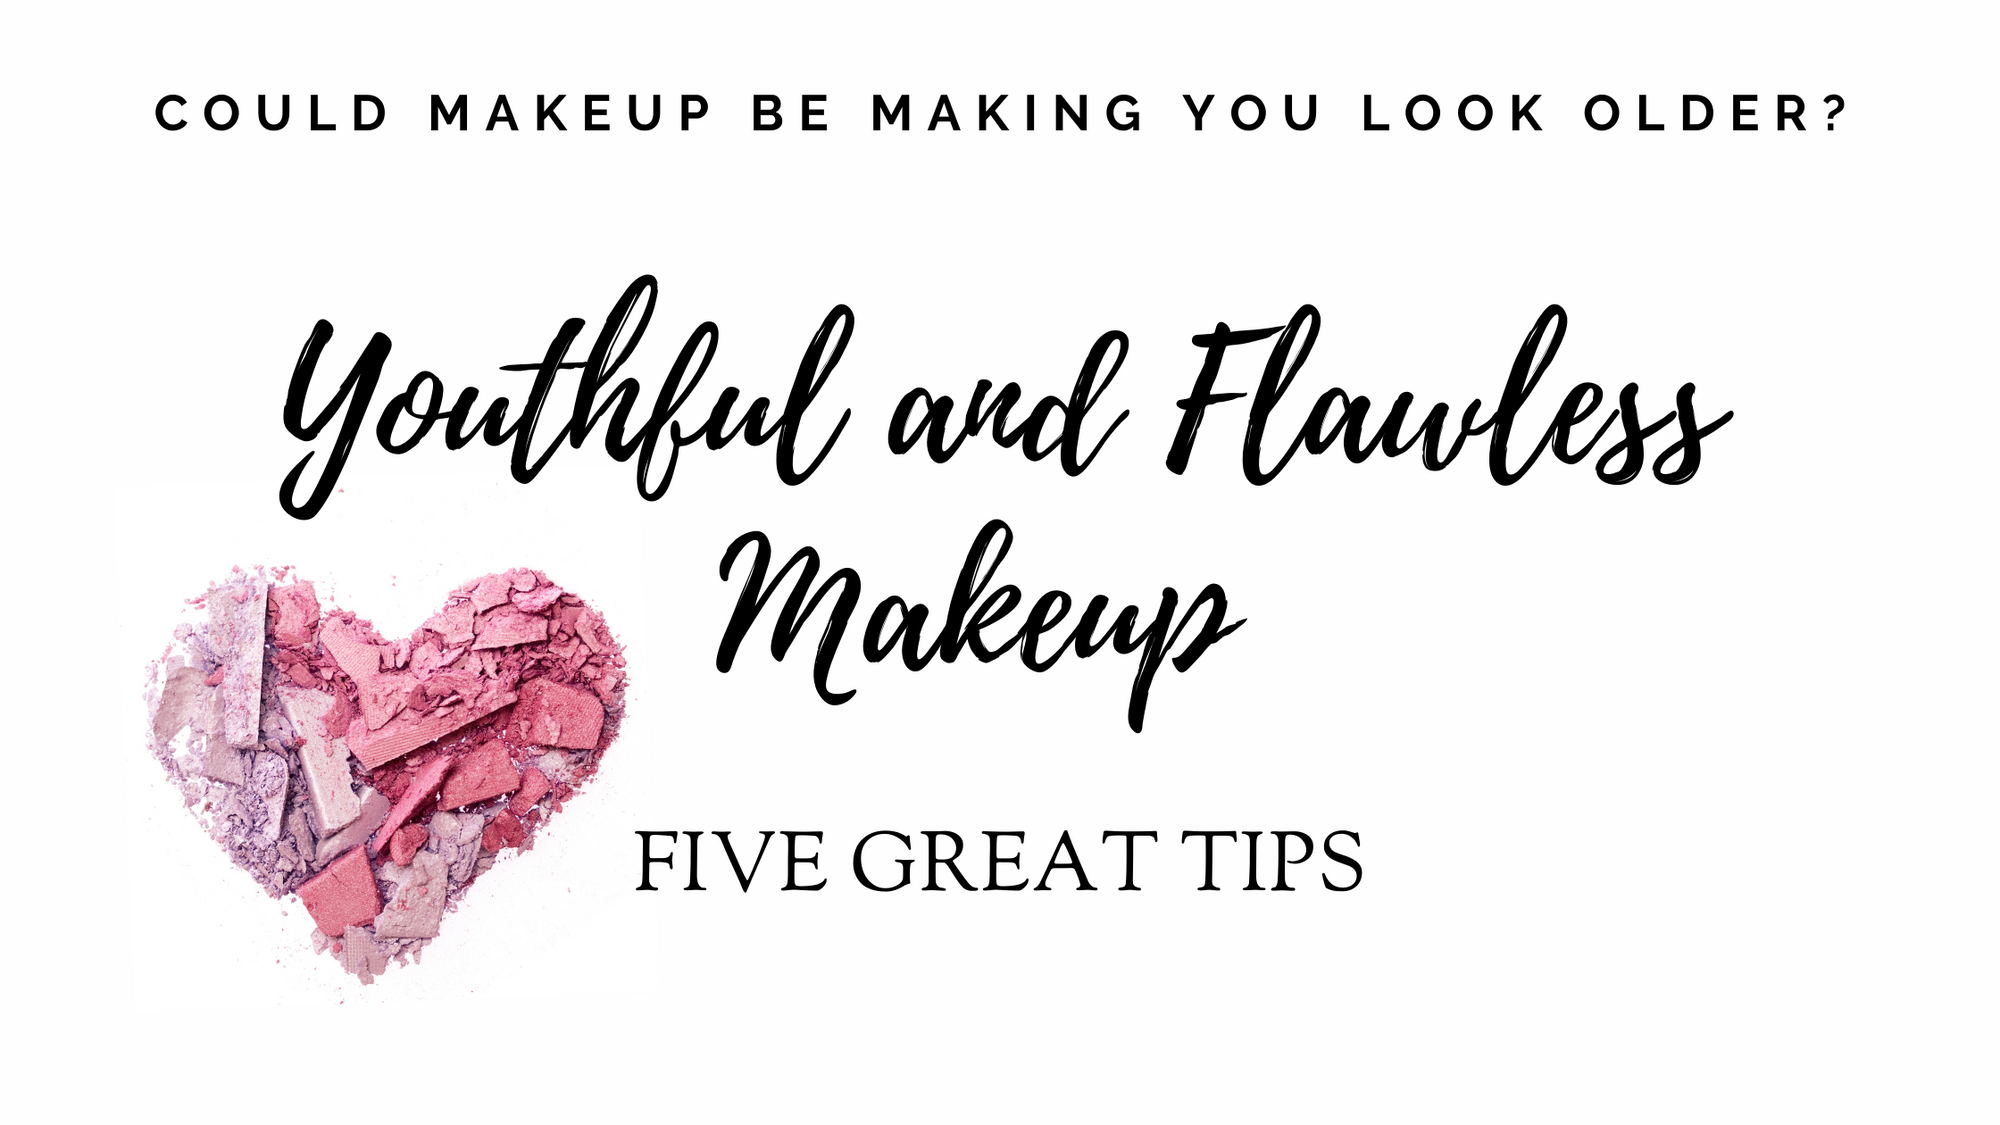 Youthful looking makeup!  5 great tips!